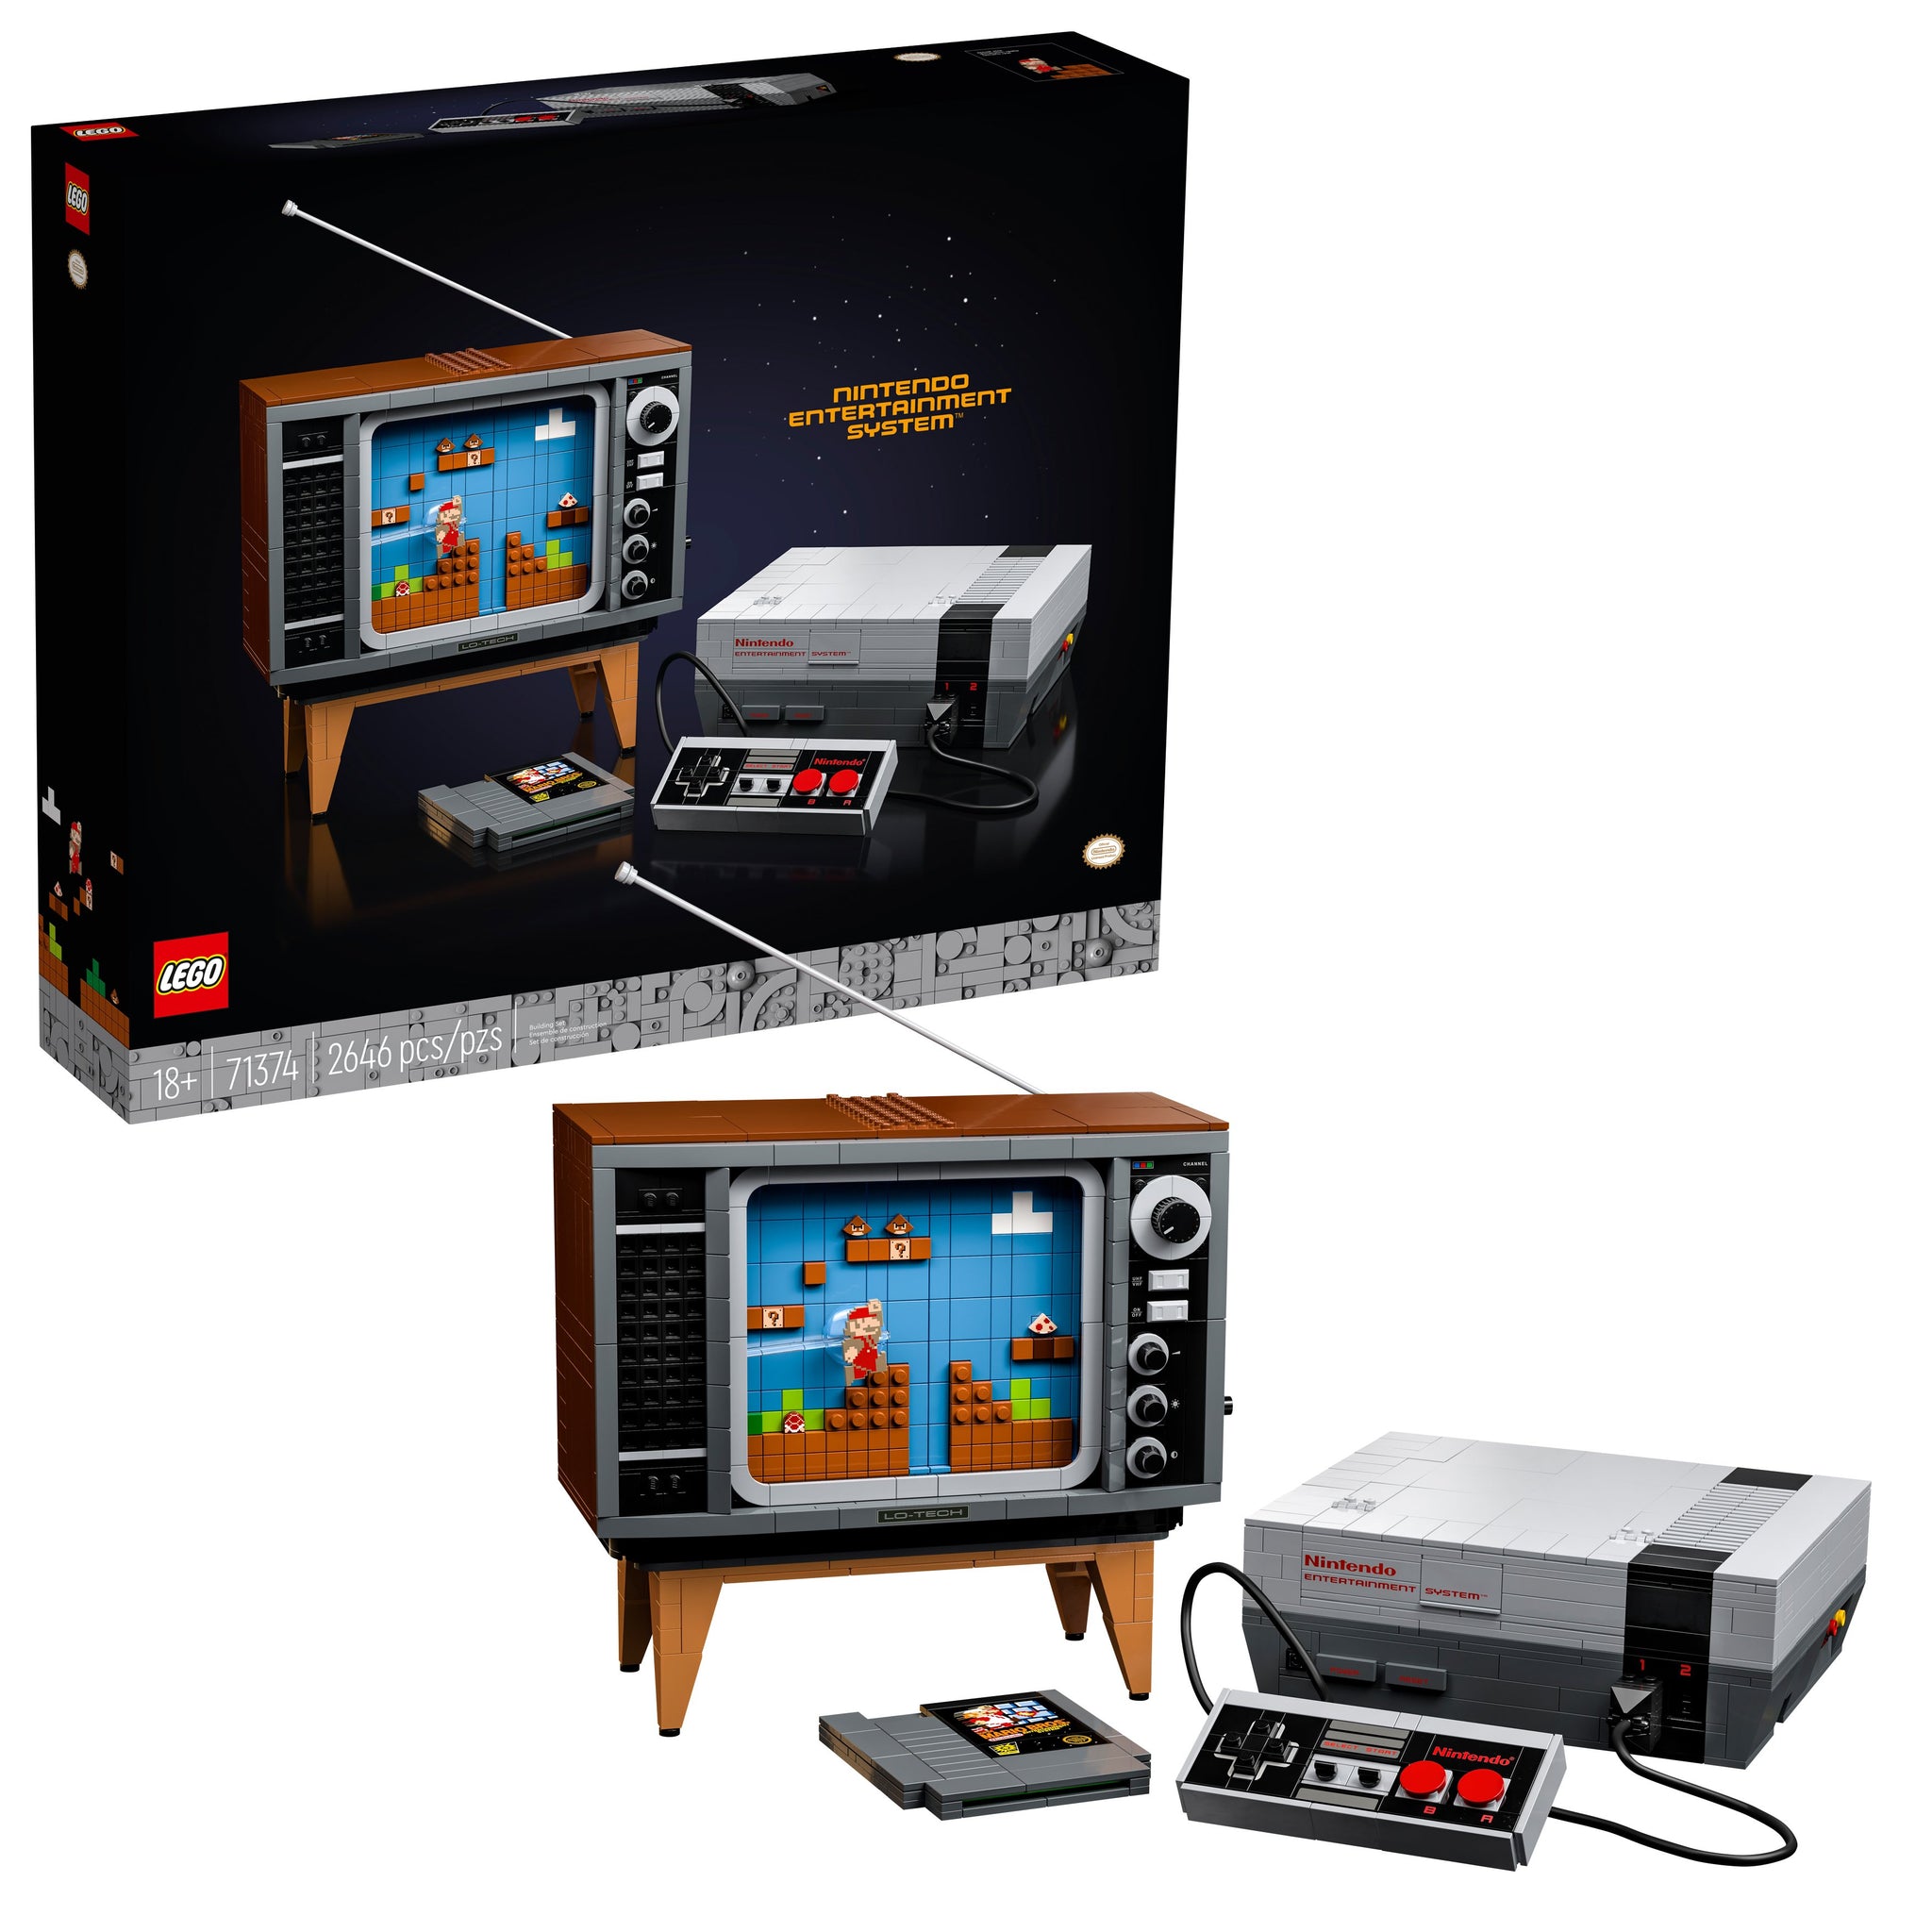 Is the LEGO 71374 Nintendo Entertainment System (NES) more than